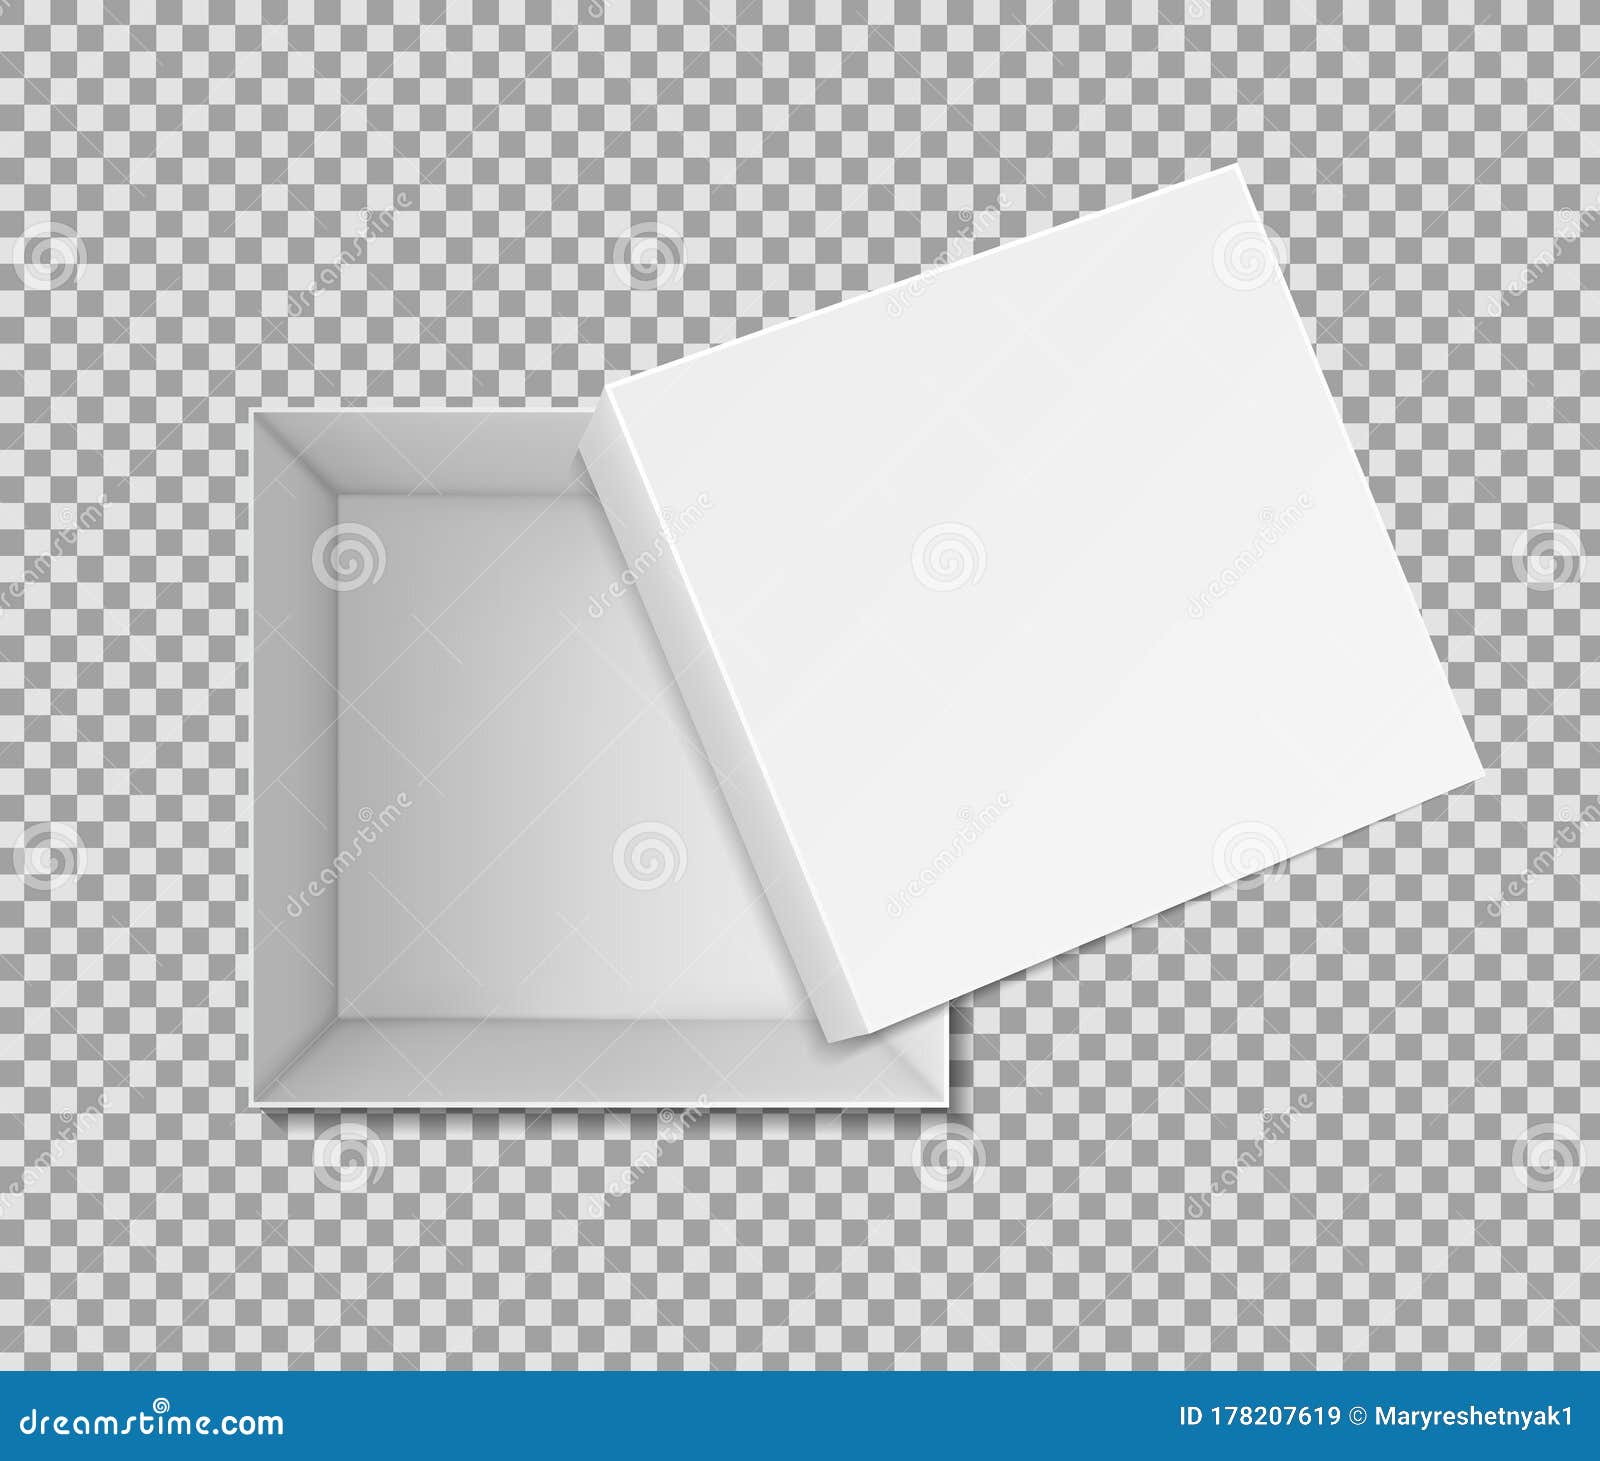 Download 3d White Box Mockup With Top, Inside View. Open Square ...